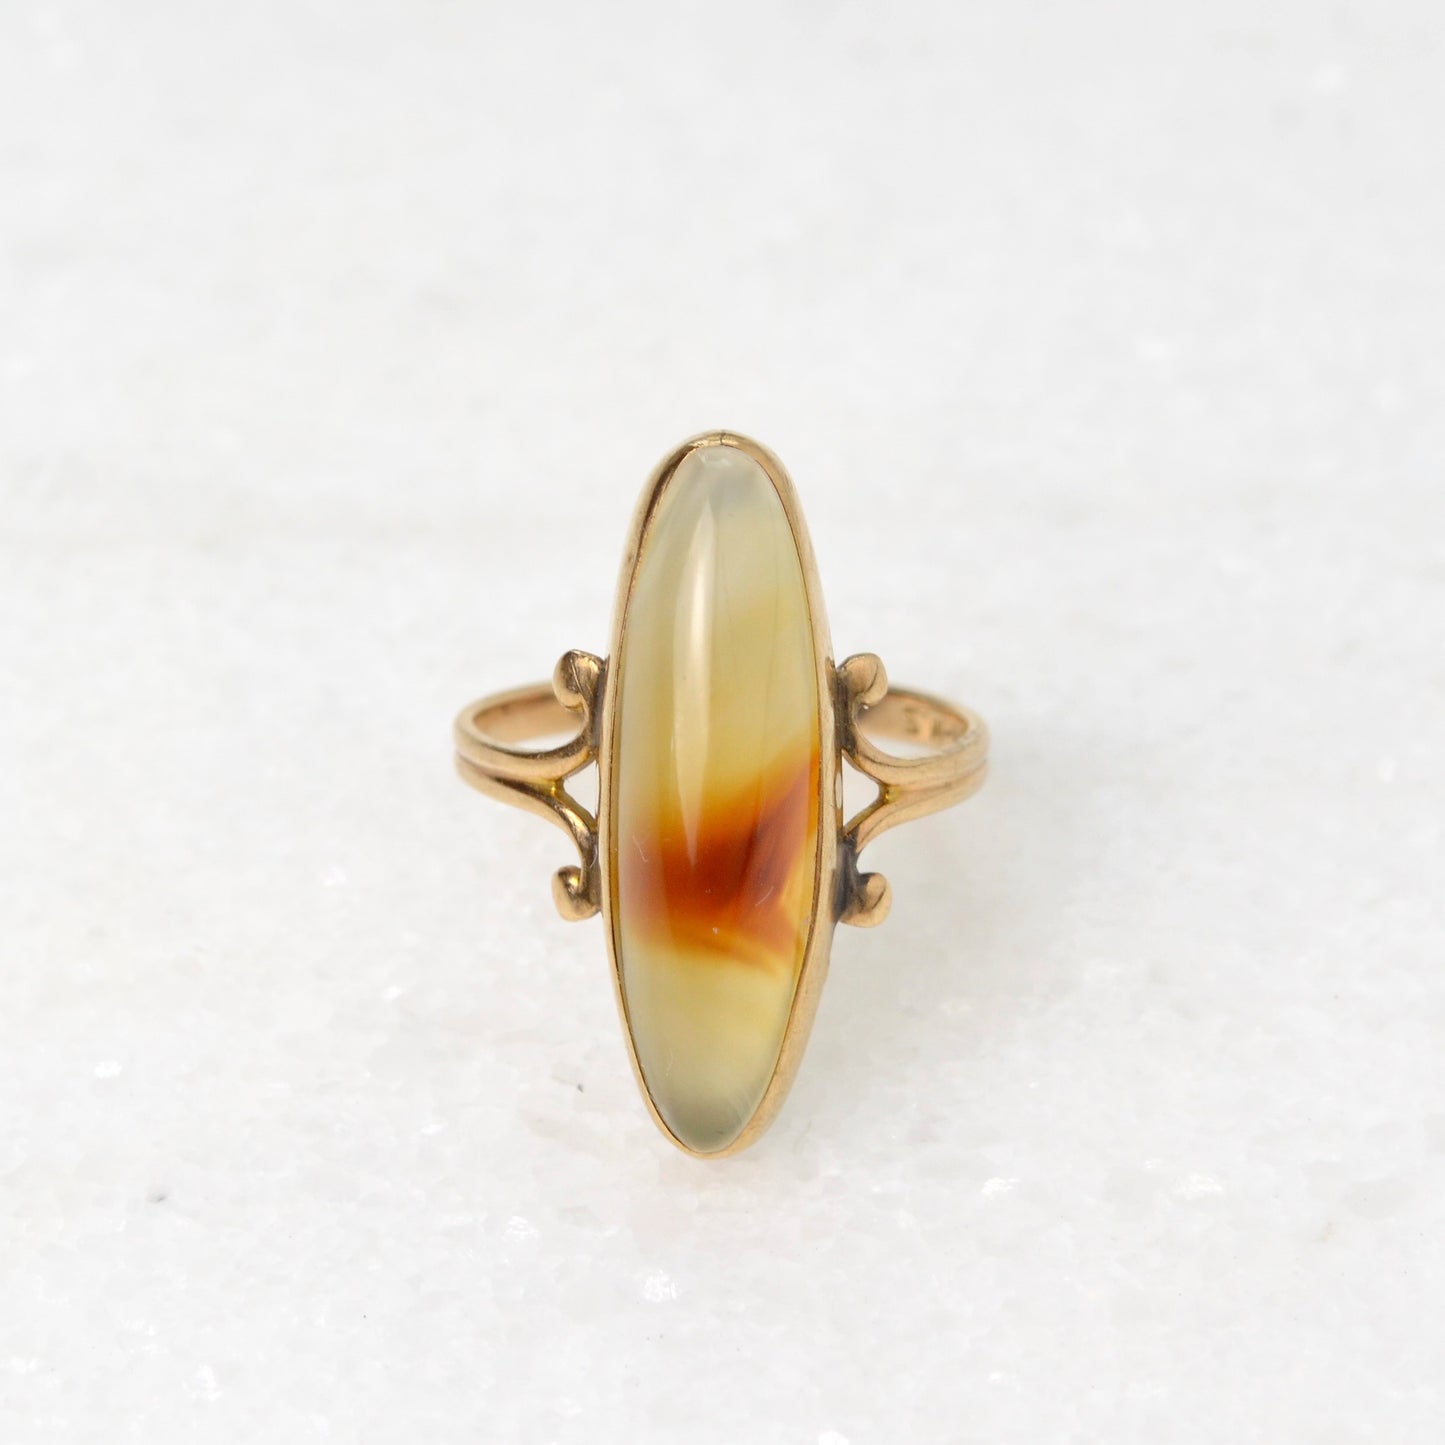 Antique Agate and Gold Ring